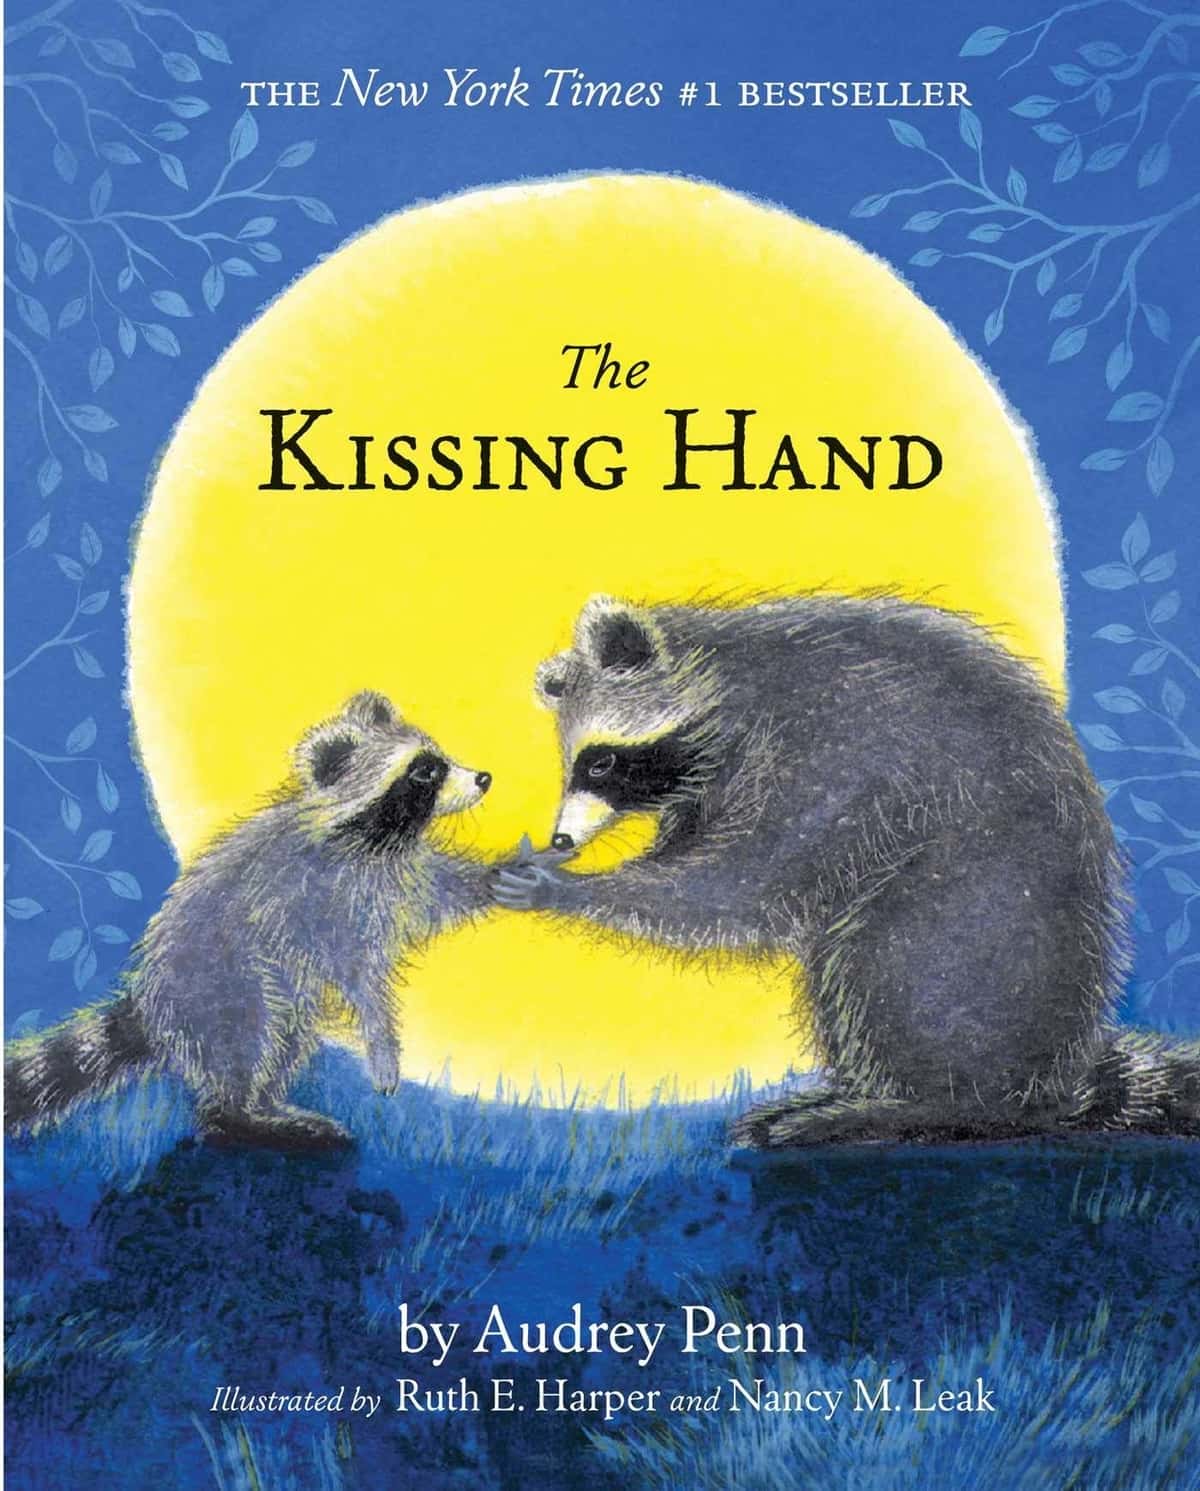 The book cover of "The Kissing Hand."